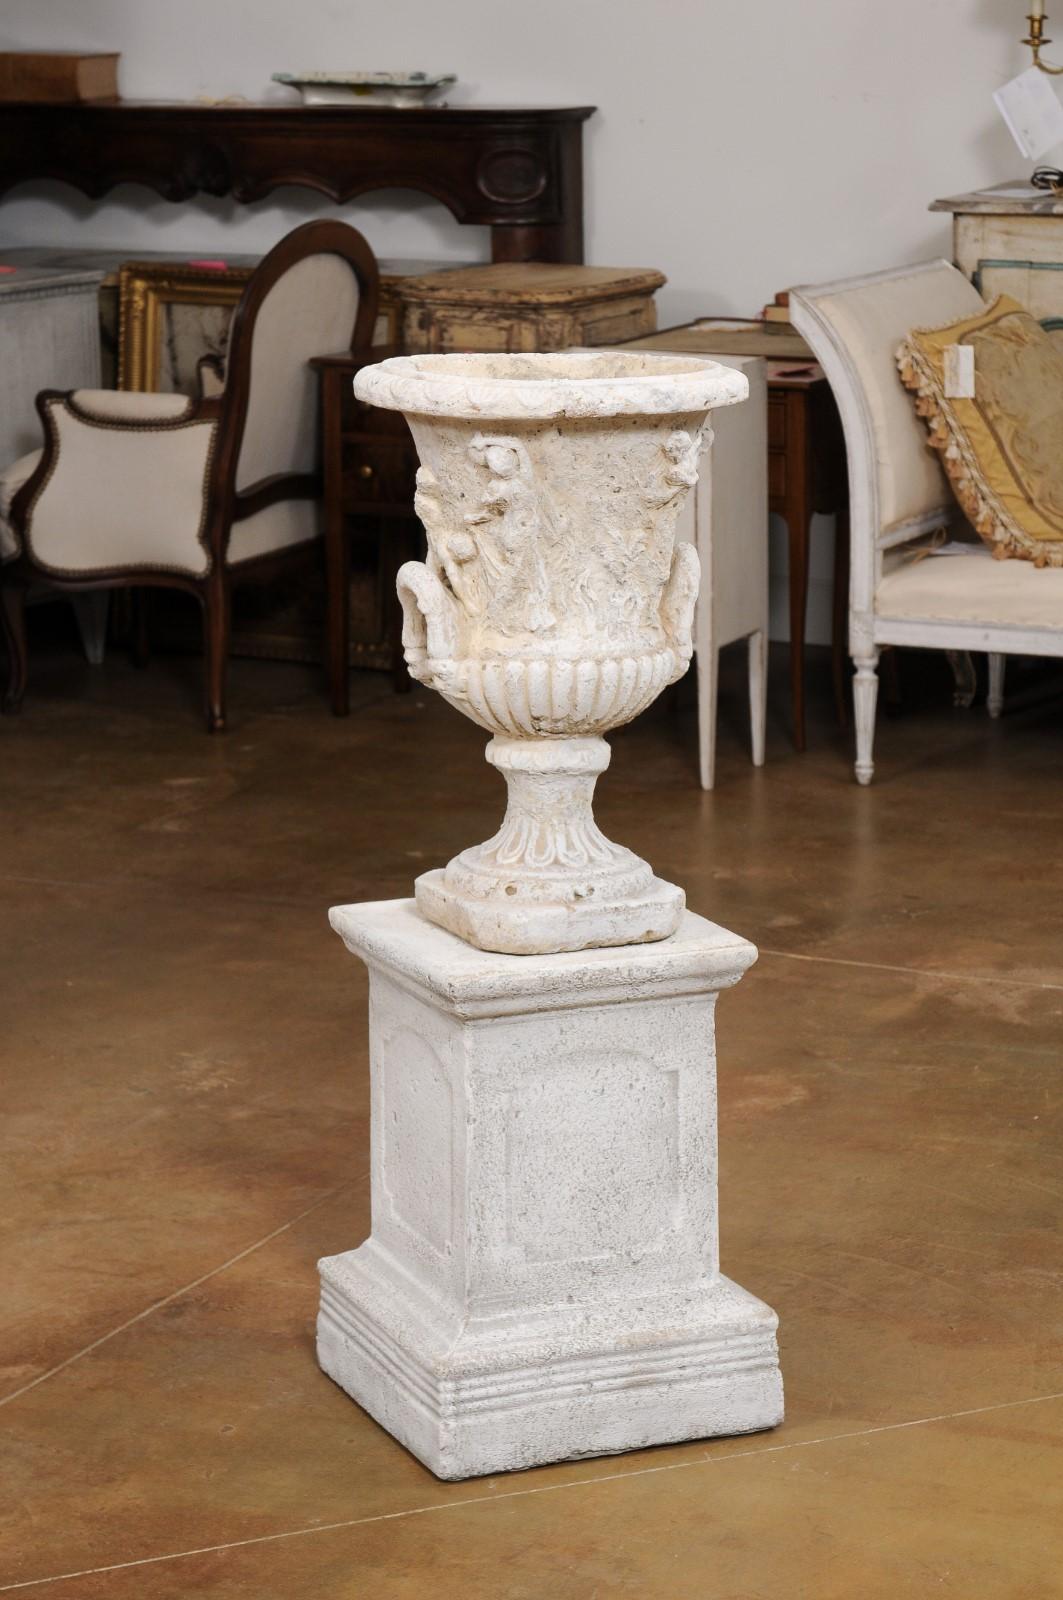 French Provincial French Provençale Medici Vase Inspired Jardinière with Carved Scenes, circa 1870 For Sale